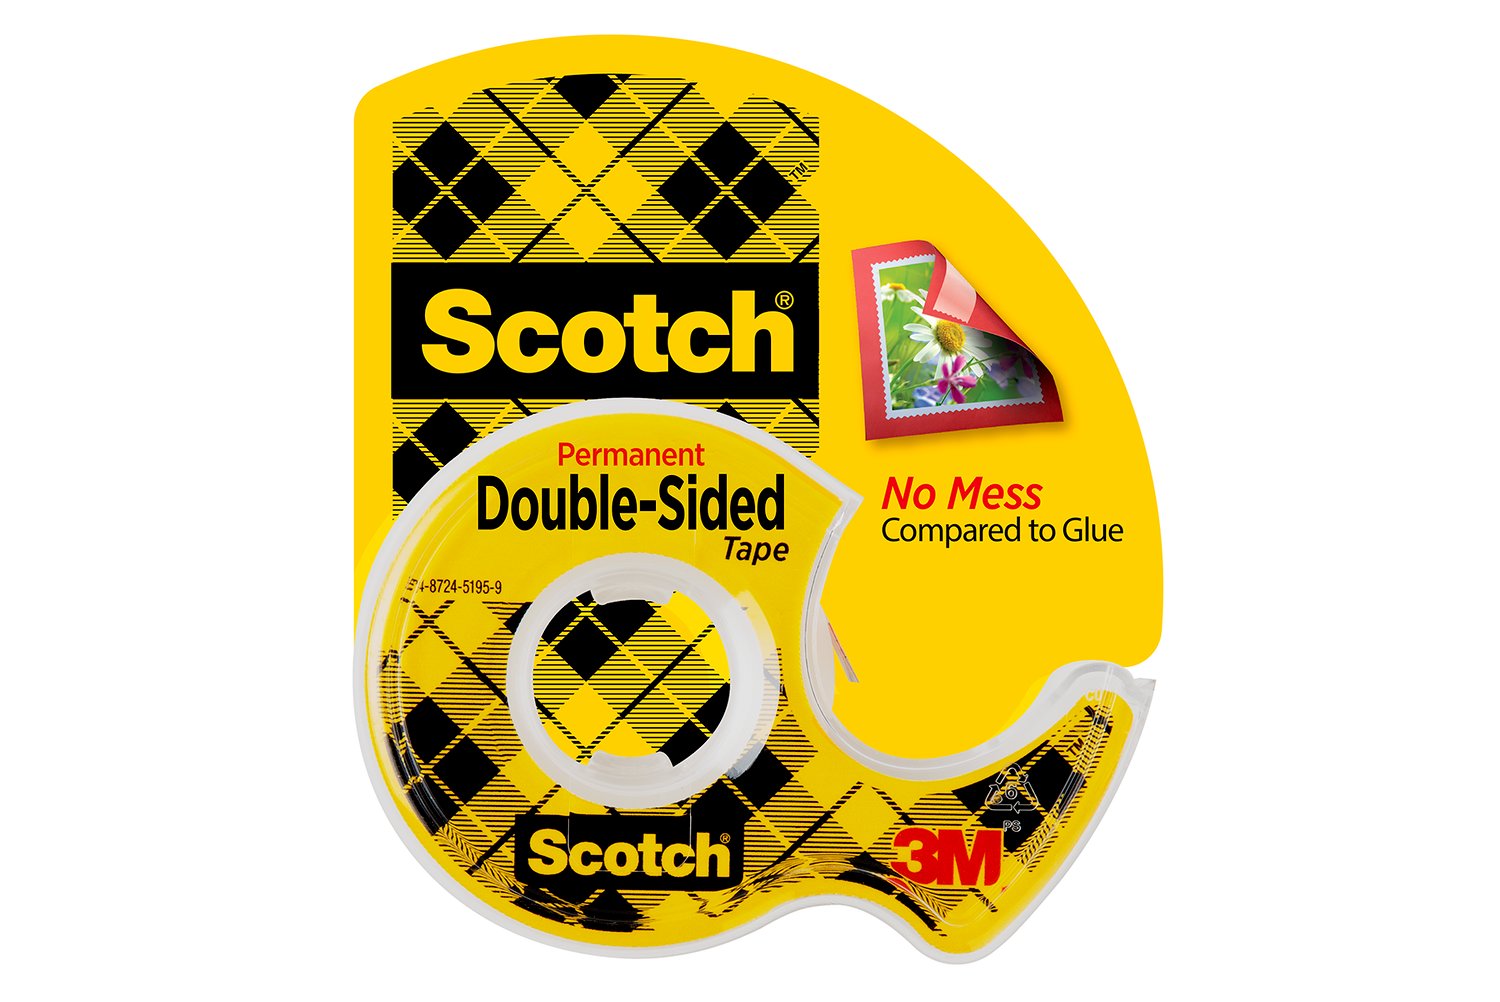 7010292617 - Scotch Removable Double Sided Tape 238, 3/4 in x 200 in (19 mm x 5.08
m)